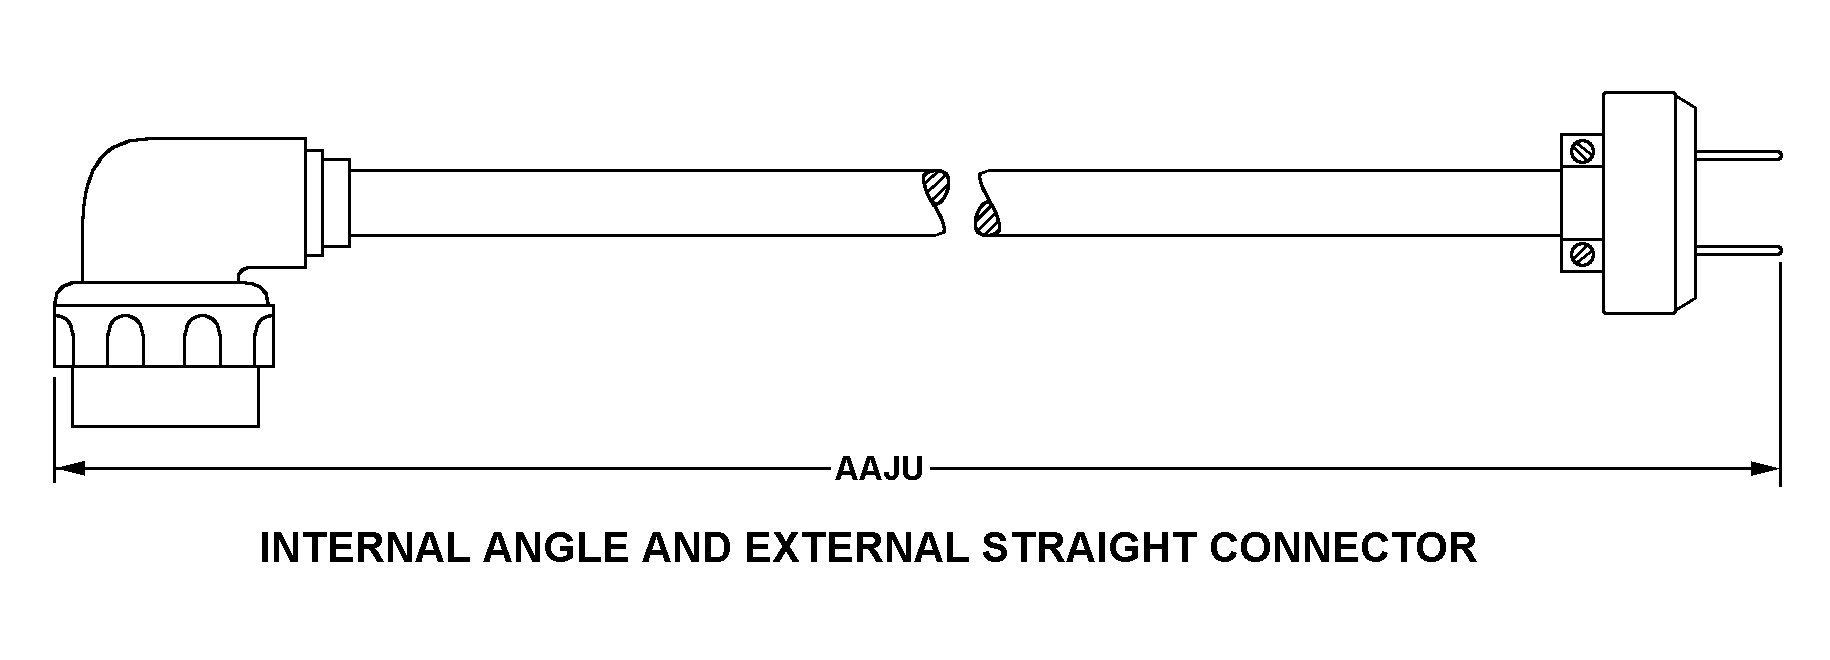 INTERNAL ANGLE AND EXTERNAL STRAIGHT CONNECTOR style nsn 5995-01-063-1483